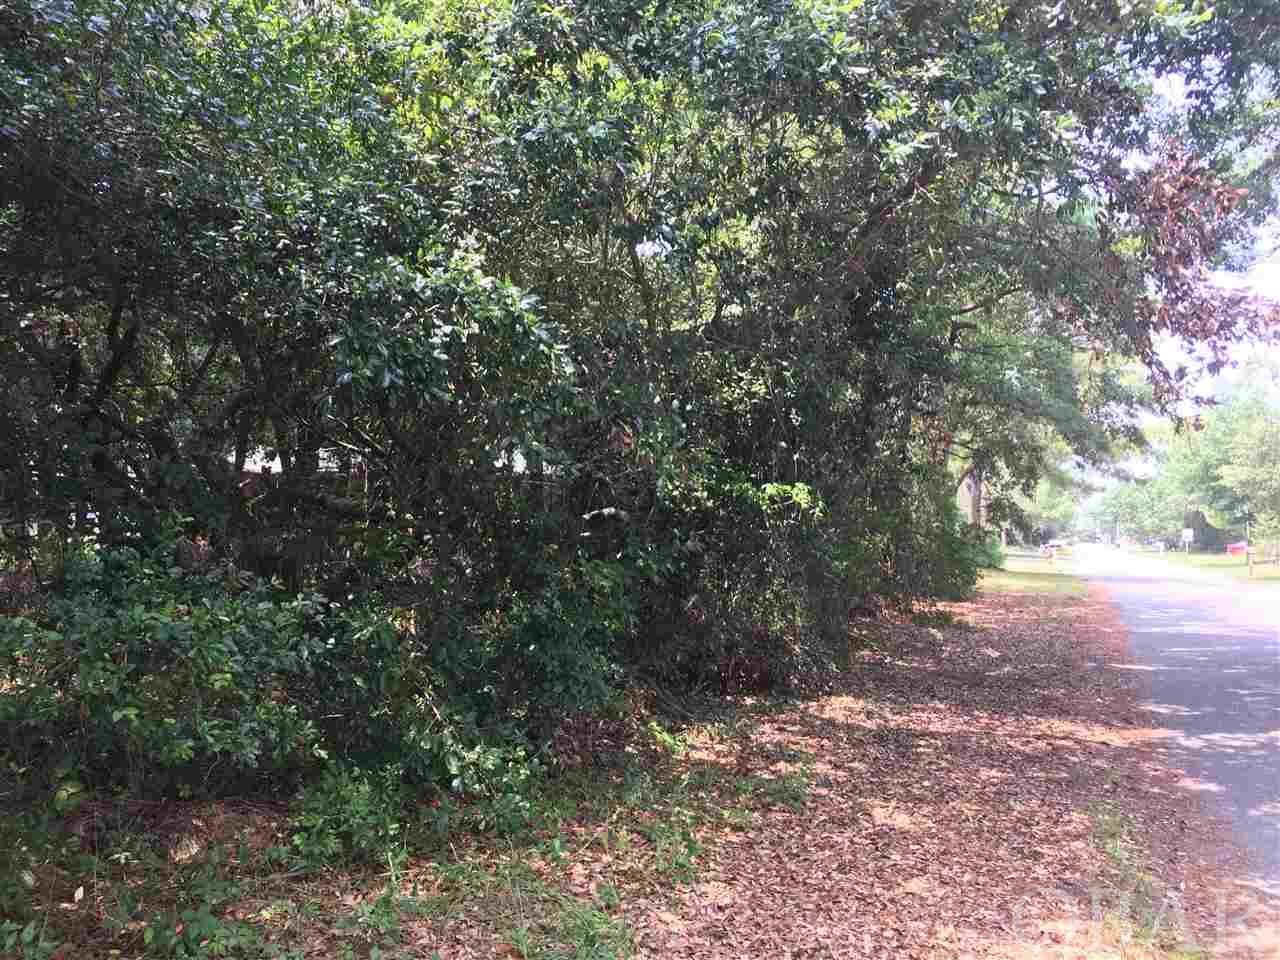 Build your Outer Banks dream home today on this quiet, centrally located Kill Devil Hills westside lot. Convenient to First Flight Schools, shopping, restaurants, public beach accesses and all popular OBX attractions. Lot is located in X flood zone (no flood insurance required). Lot is approximately 75ft (street frontage) X 140ft.